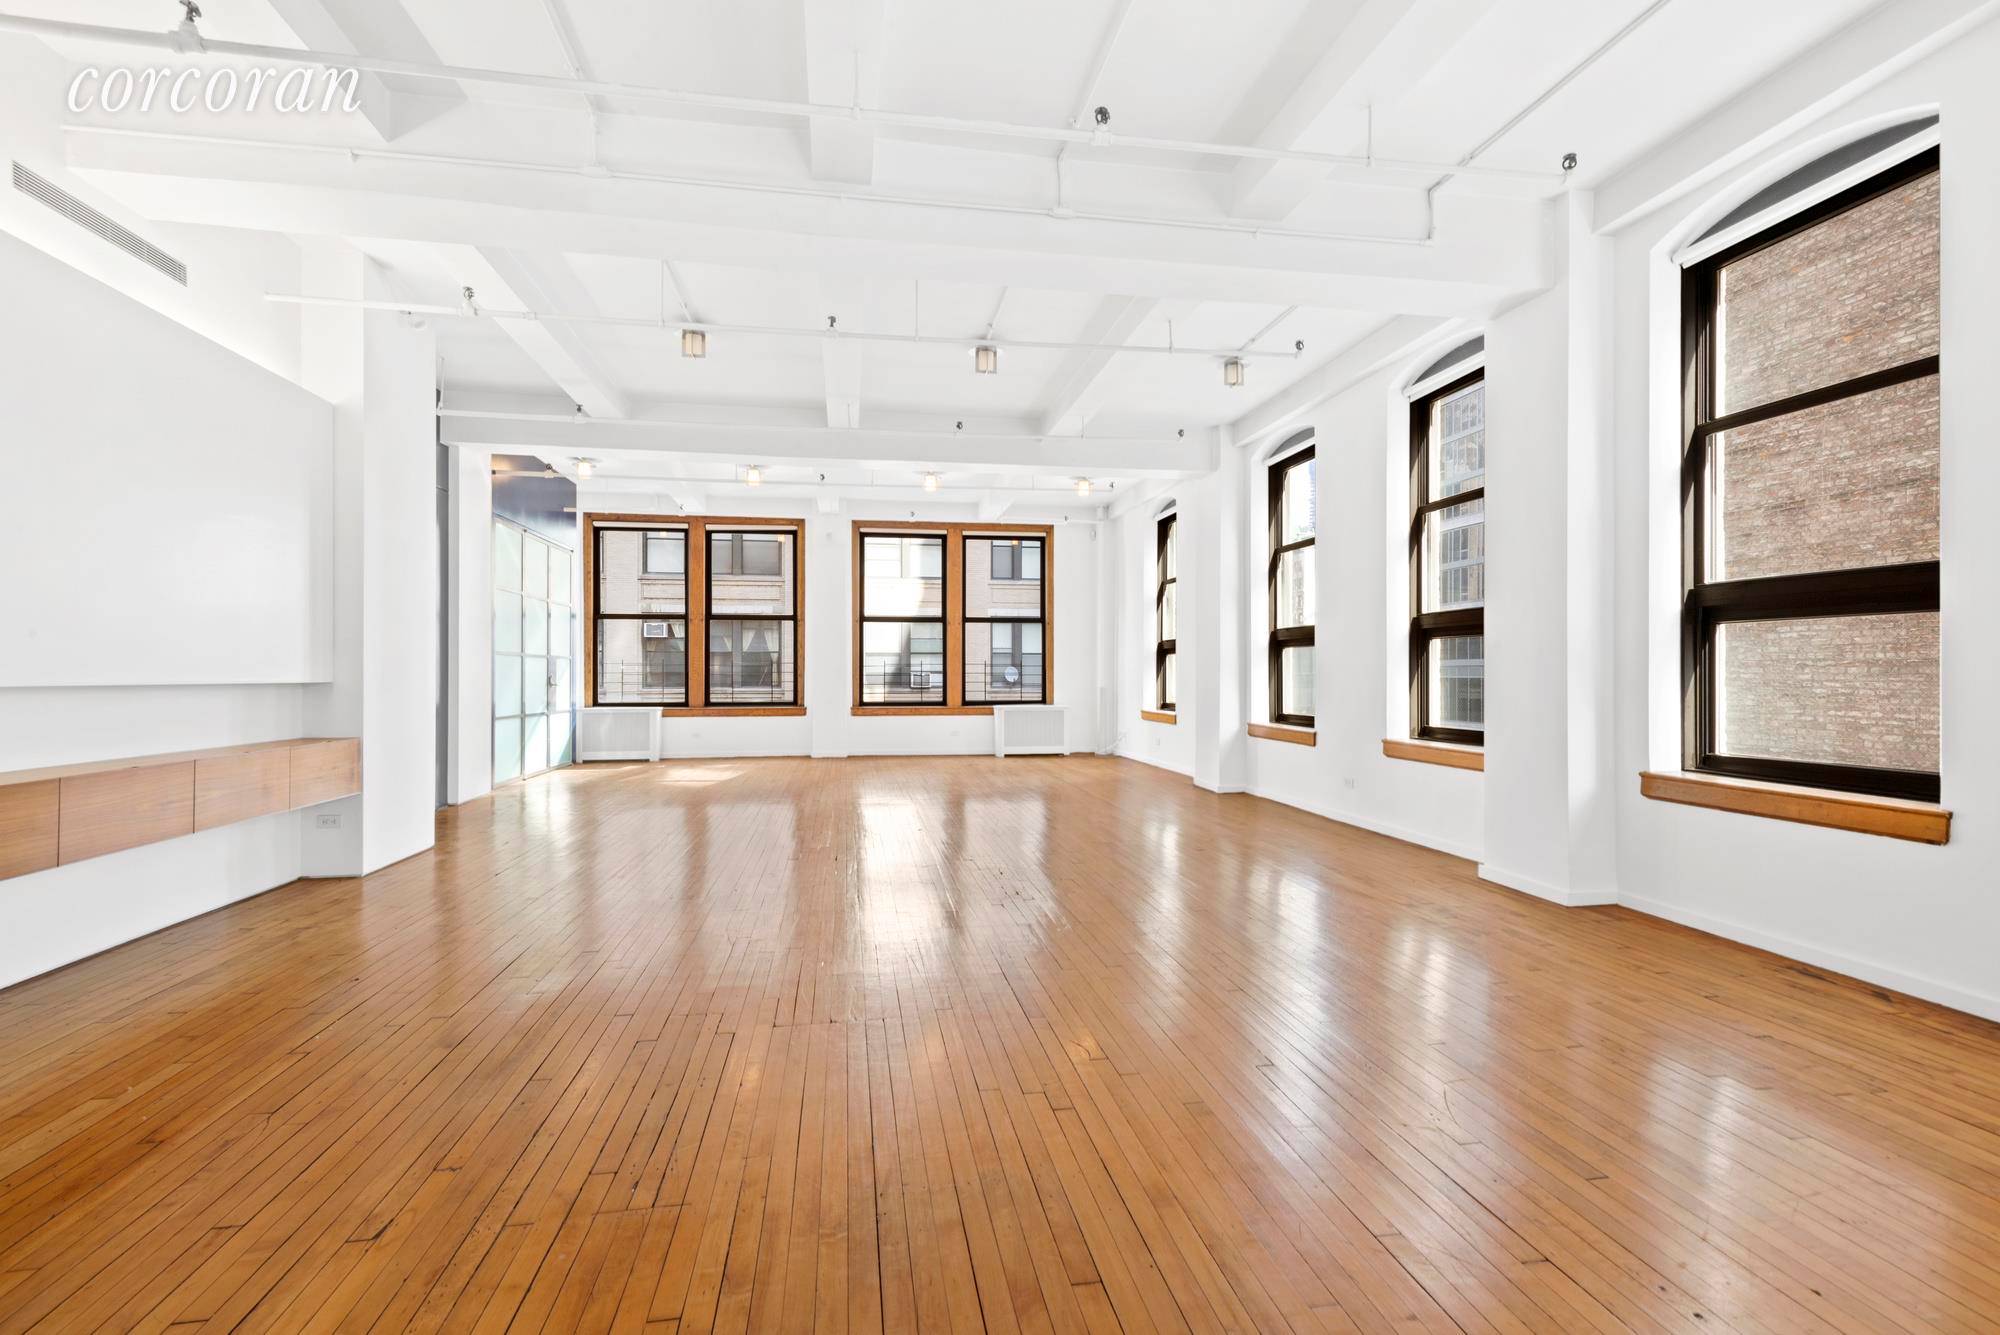 A Must See ! Full floor loft at 116 West 29th Street where Chelsea meets NoMad.